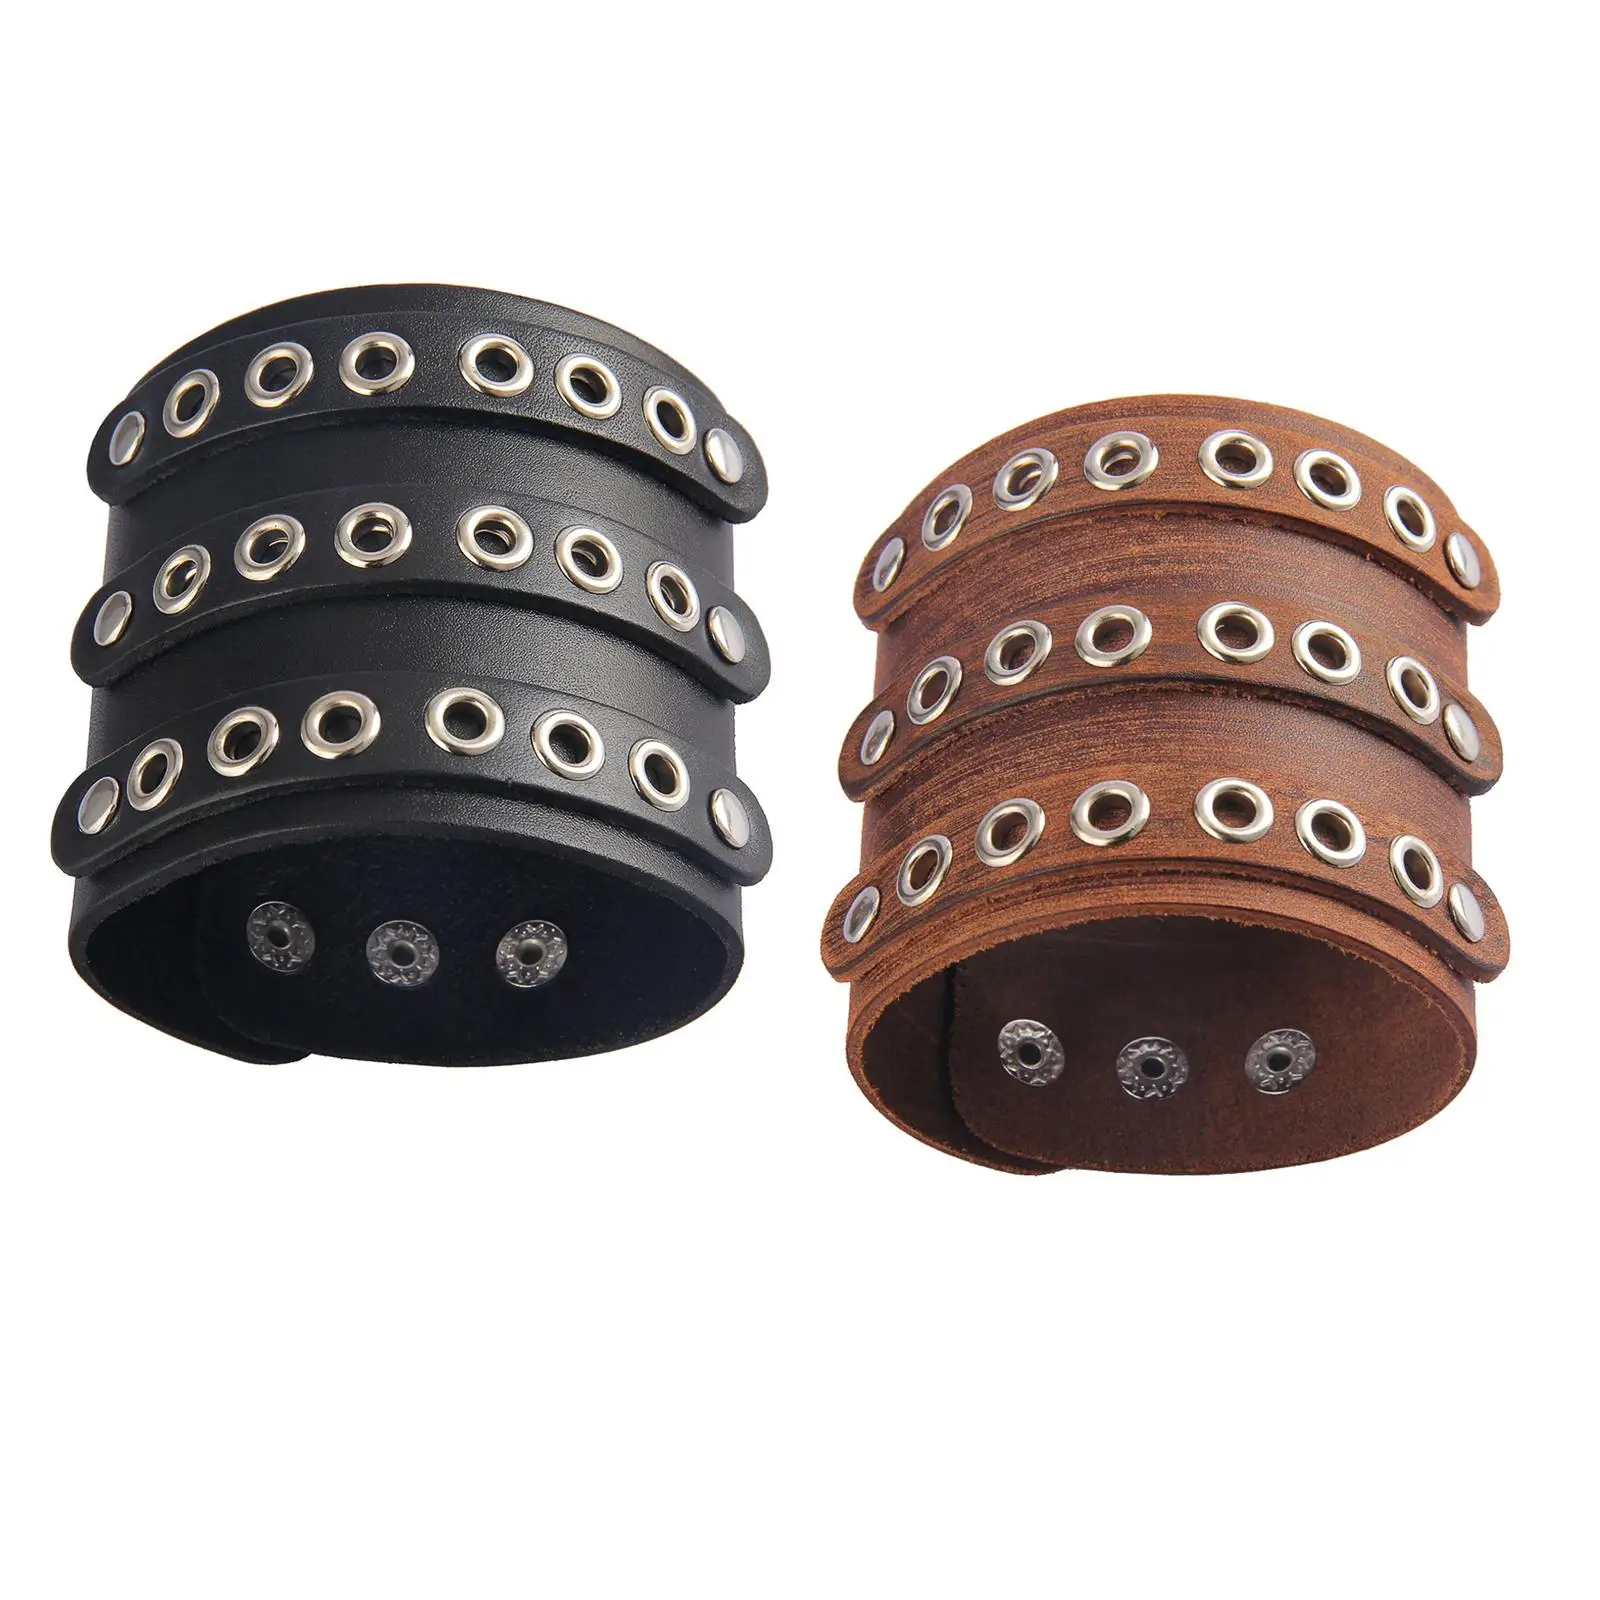 PU Leather Bracelet Three Rows of Holes Vintage Wide for Daily Party Men